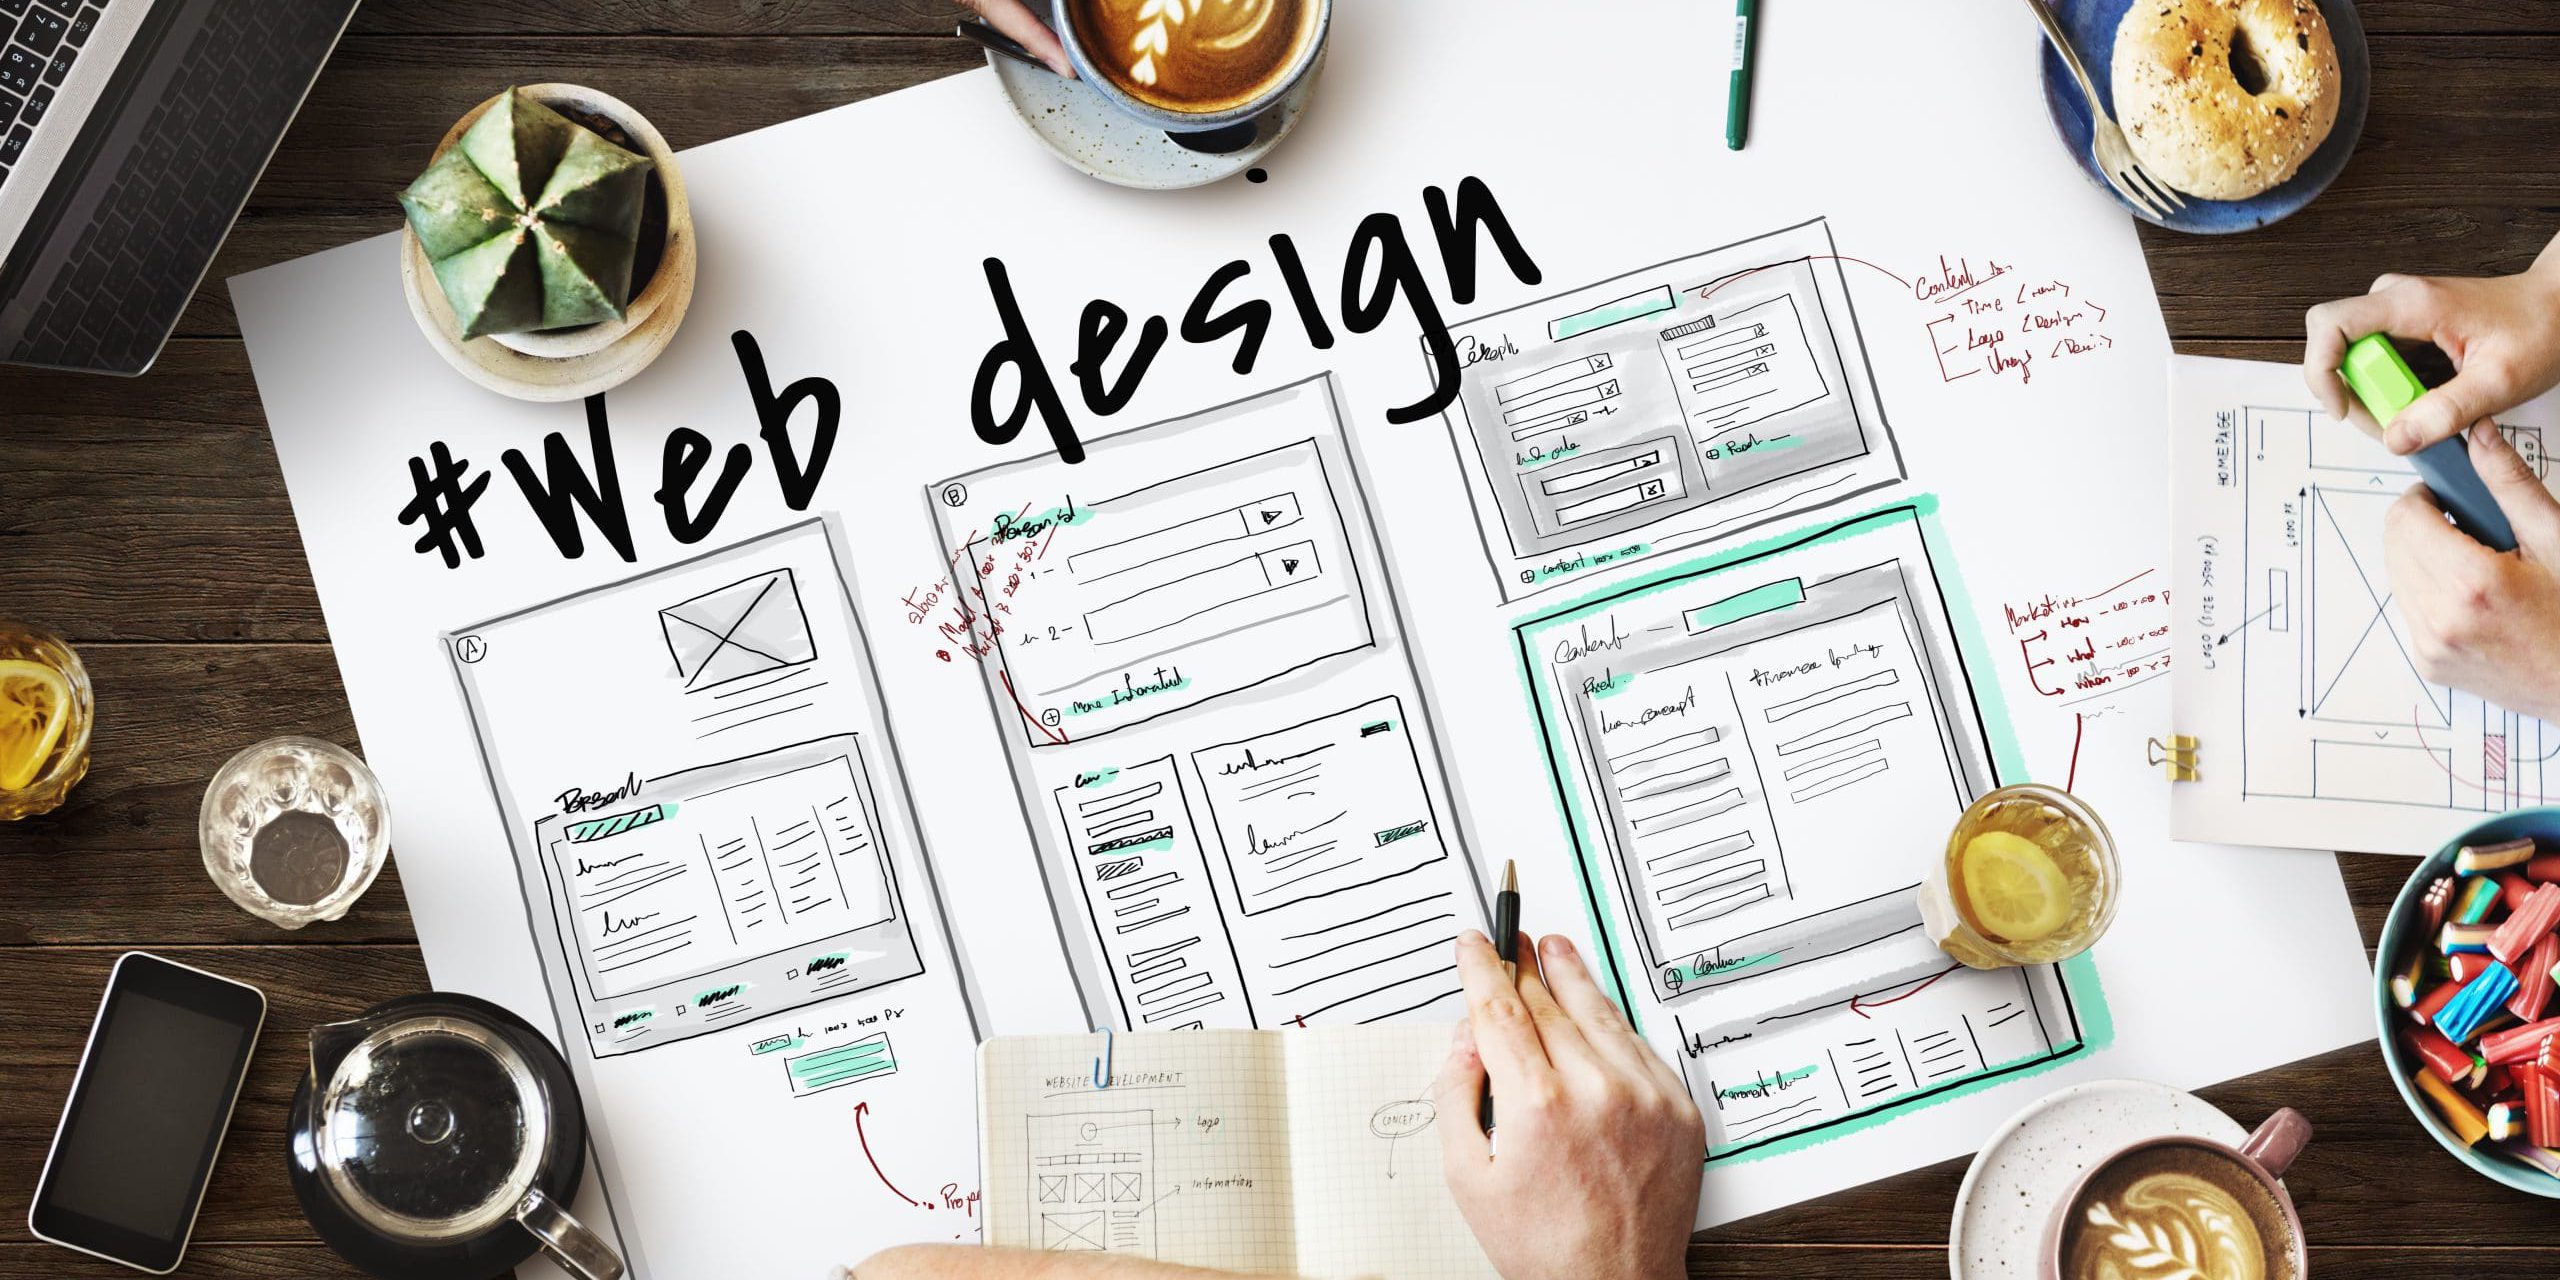 6 Essential Elements of Effective Web Design for Geelong Businesses